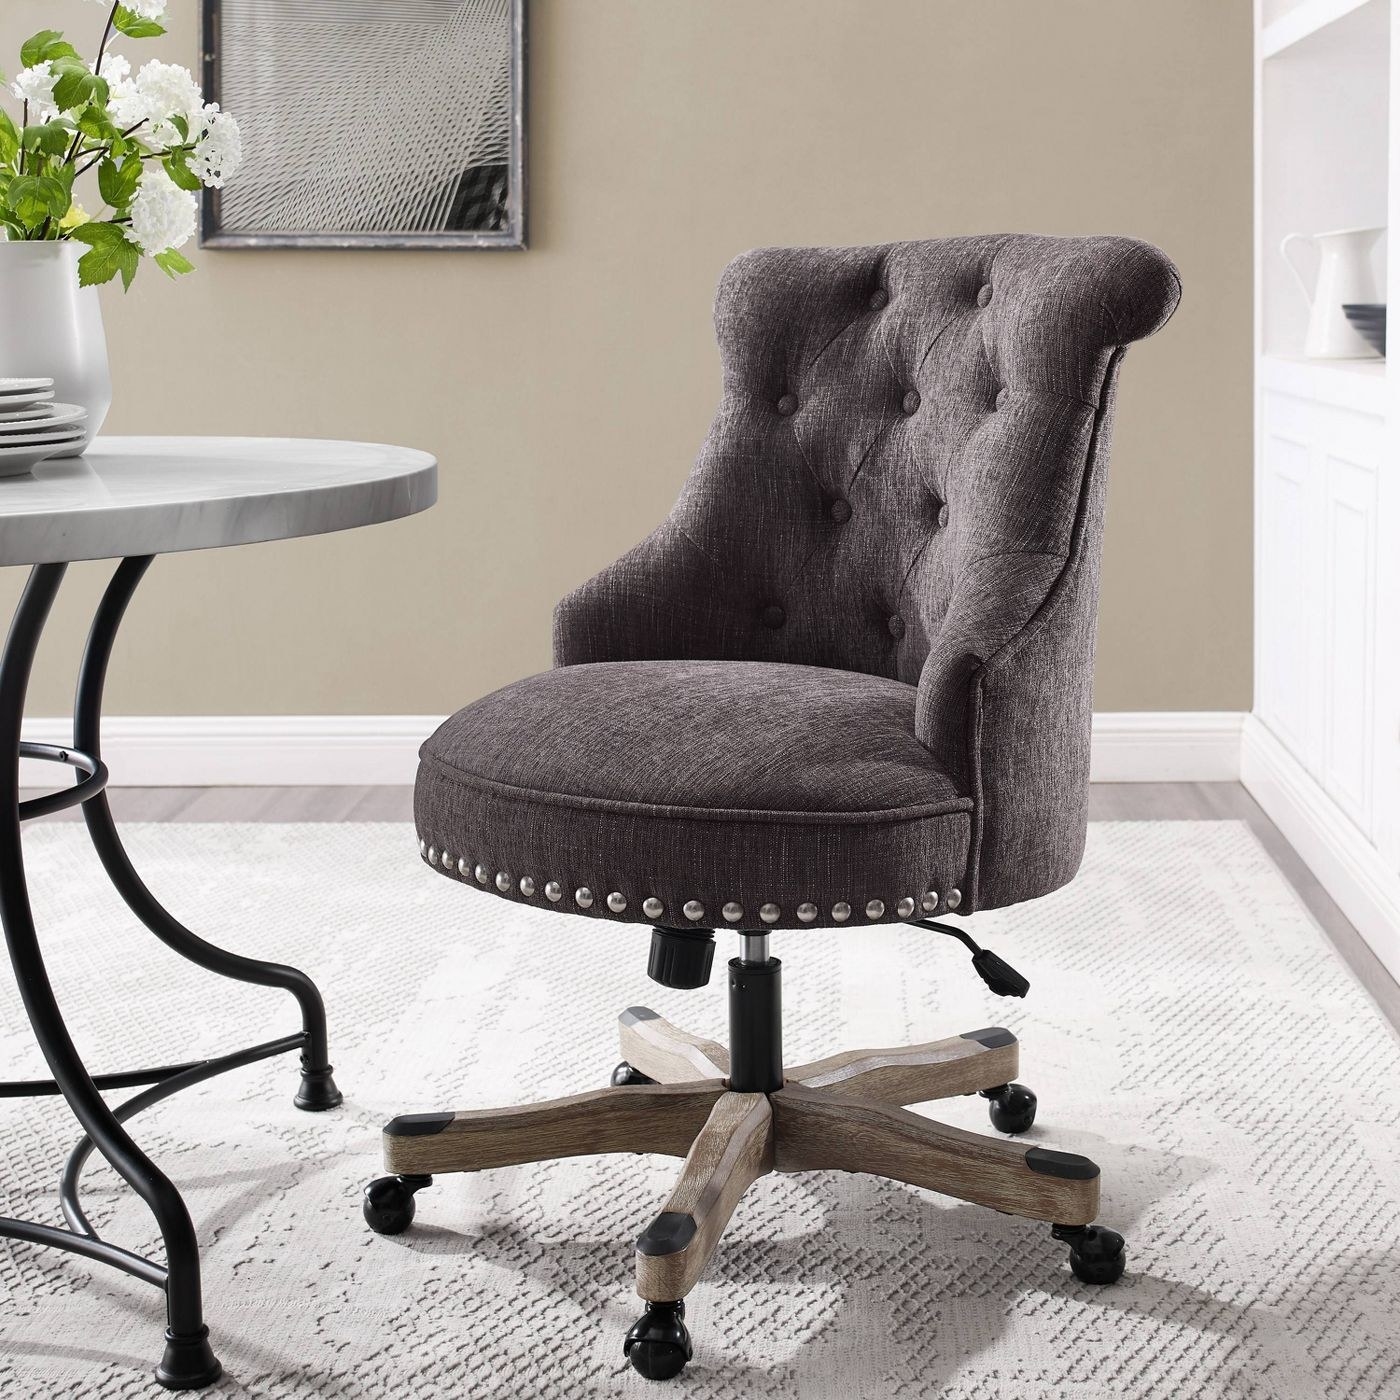 The Best Desk Chairs To Get, Upholstered Desk Chair No Wheels Uk